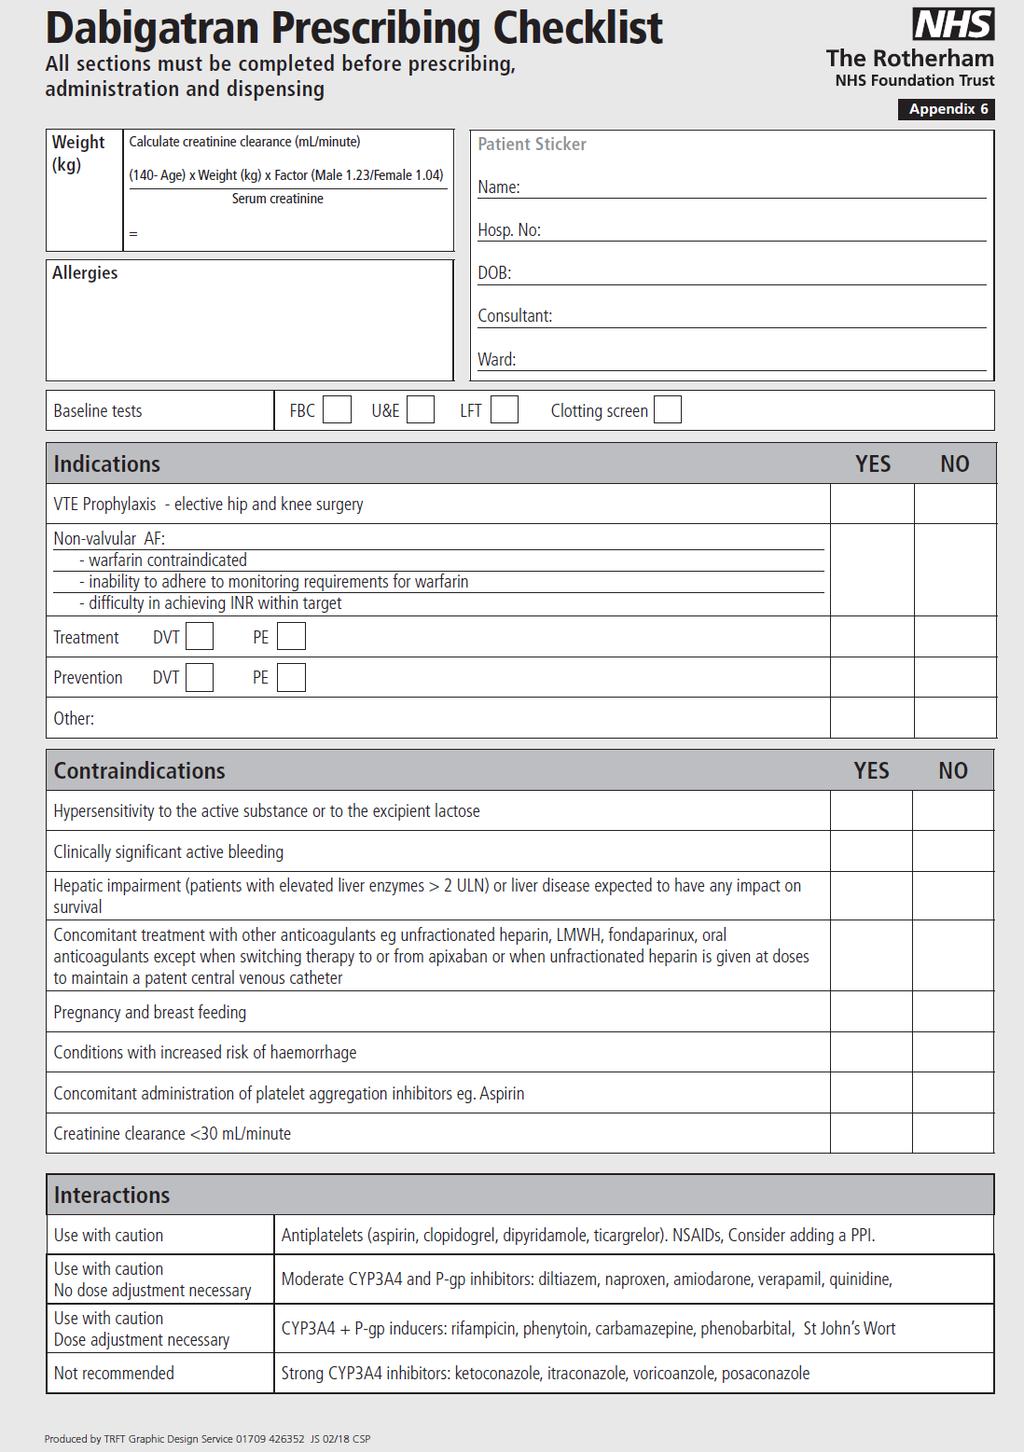 APPENDIX 6 Do not use or copy this example an original version of this form is available at